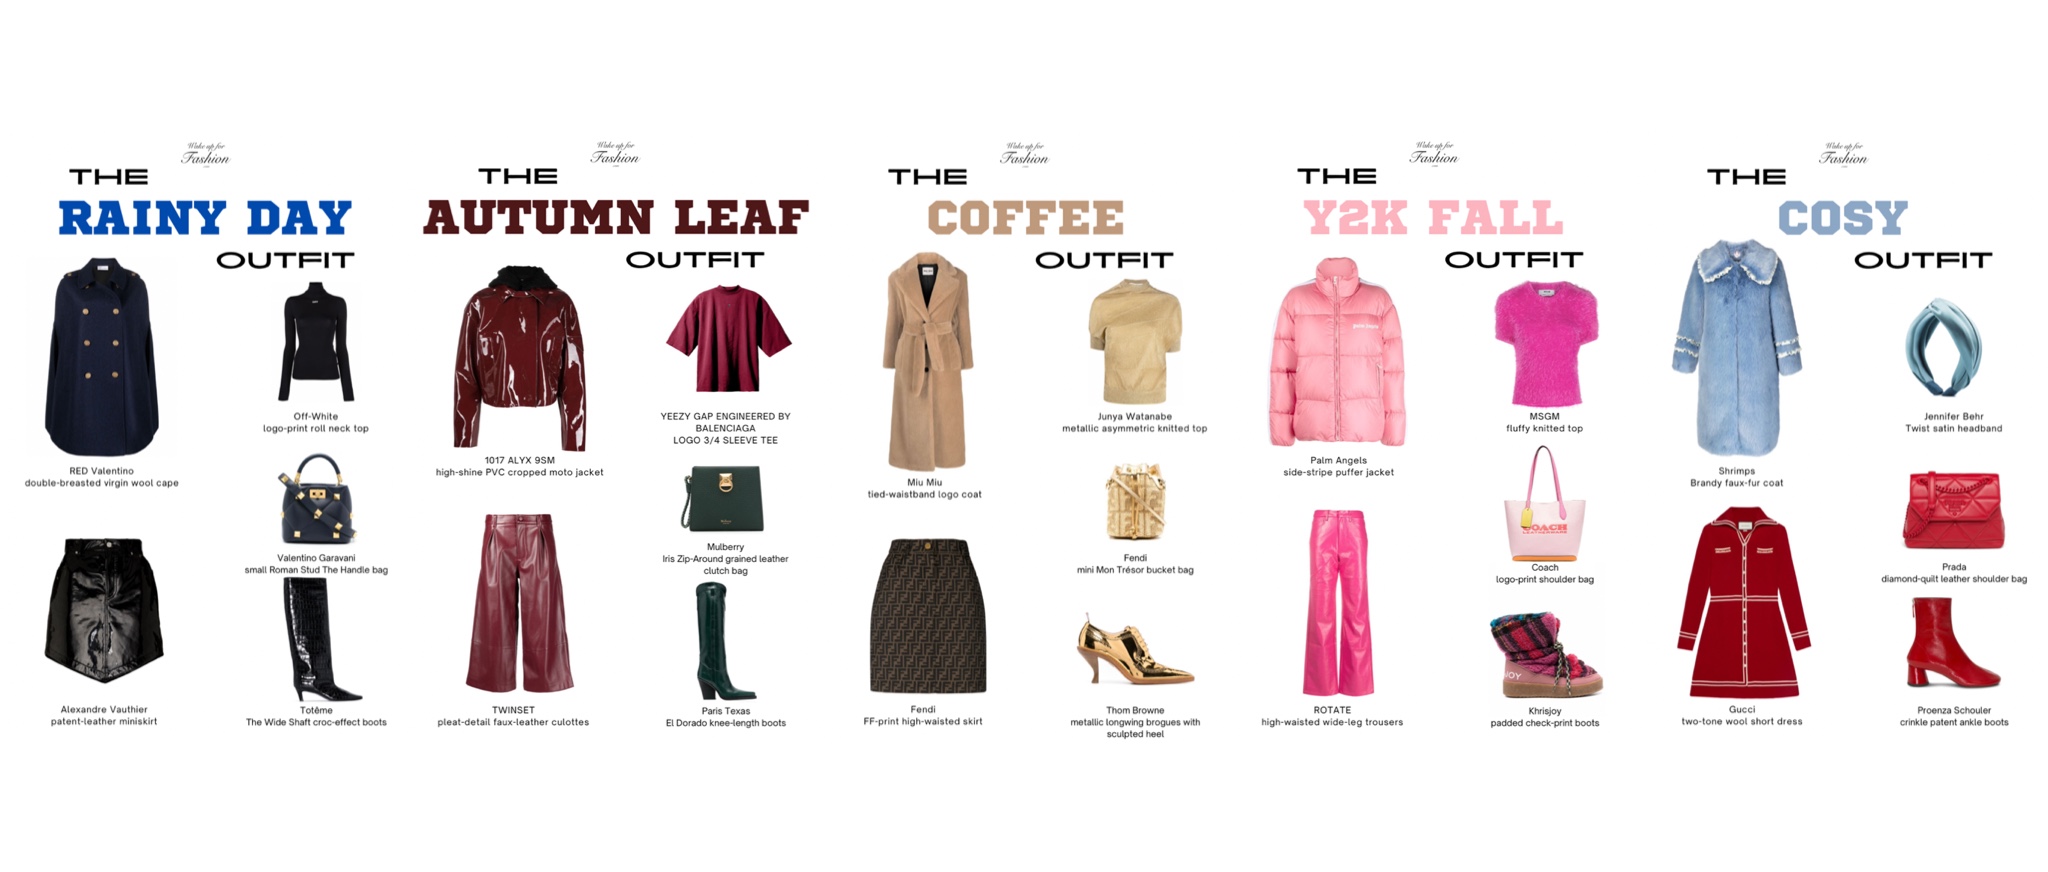 Autumn coats, dresses, tops, trousers, skirts, handbags and shoes.